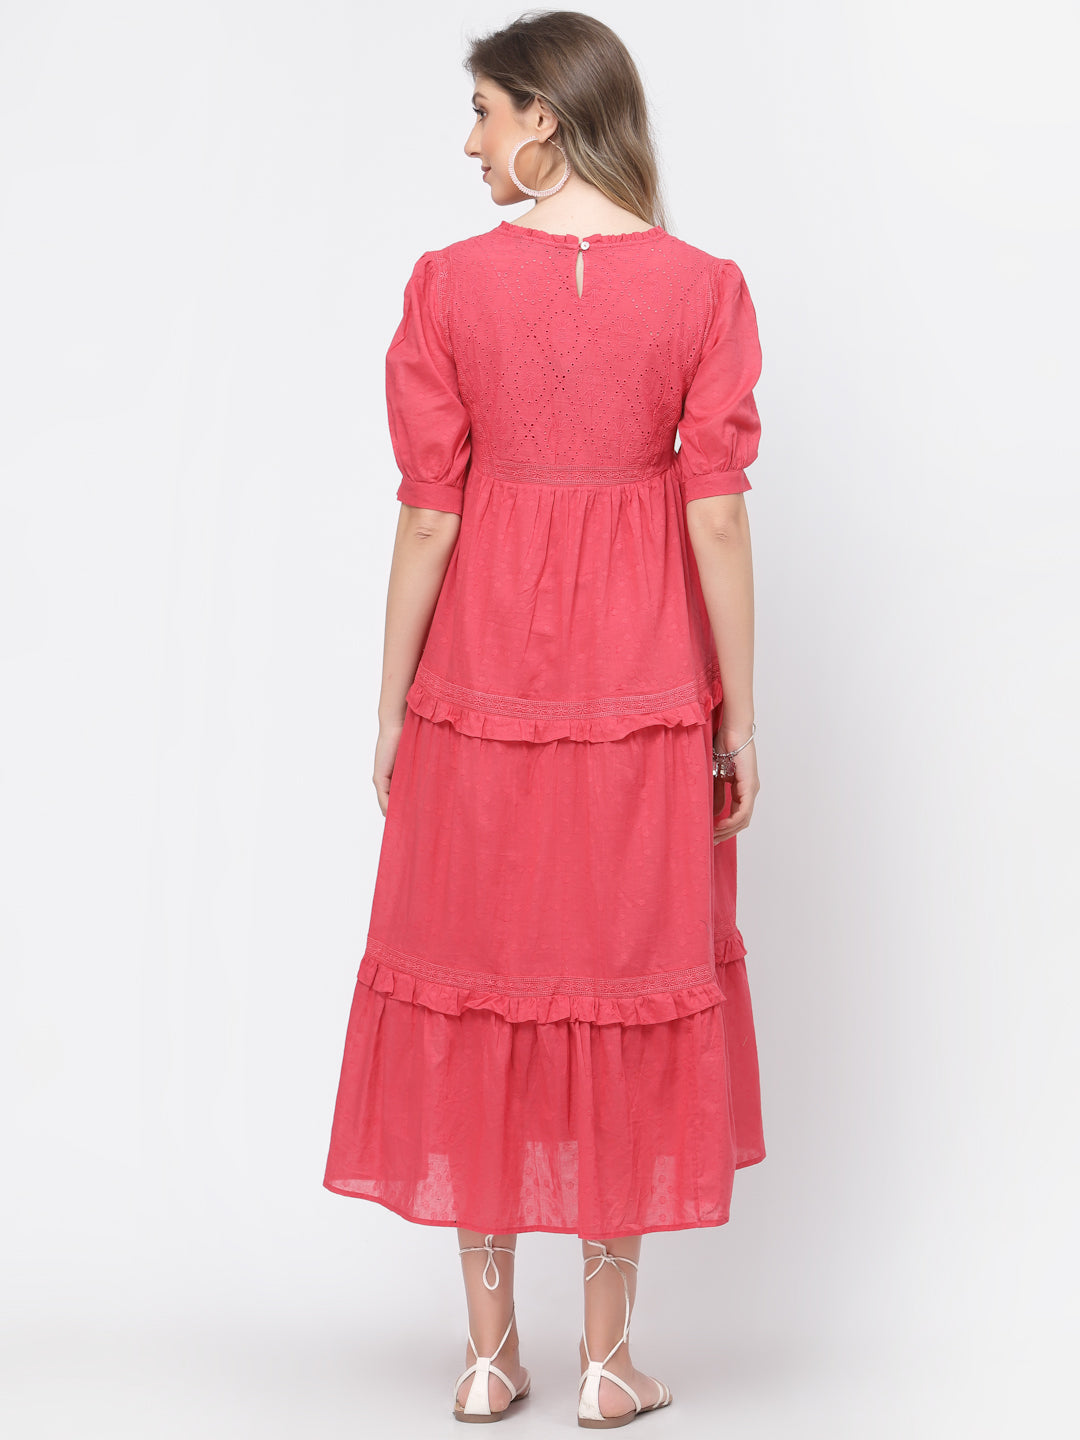 Terquois Self-Design Pink Casual Dress with Ruffled-Neck,Gathers and Emblished with Lace Dresses TERQUOIS   